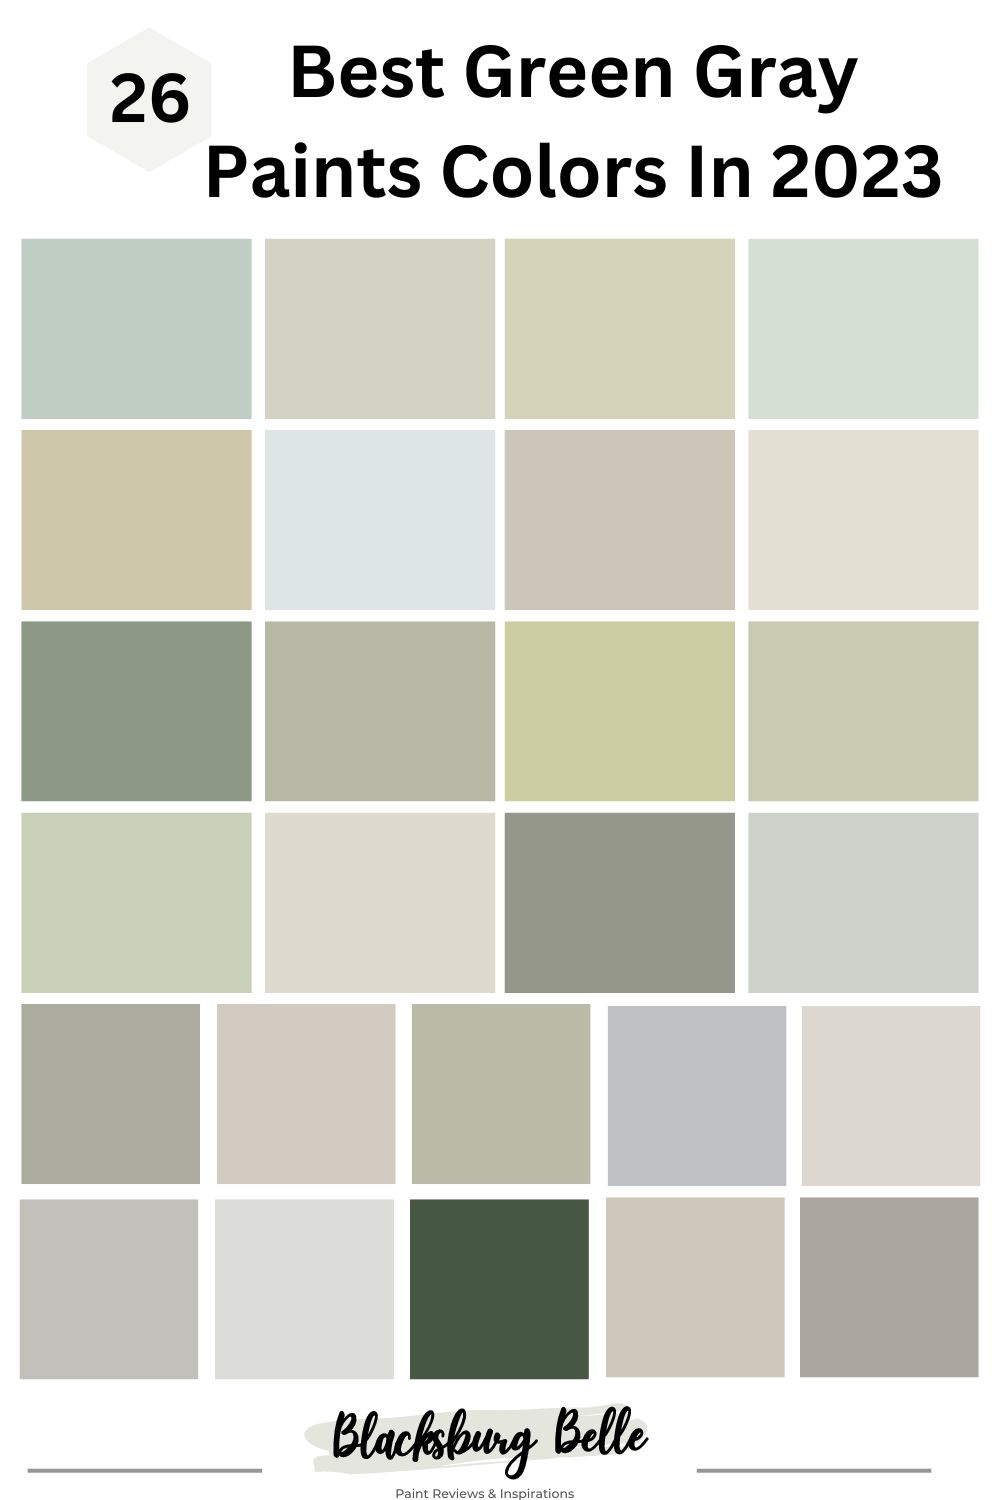 26 Best Green Gray Paints Colors In 2023